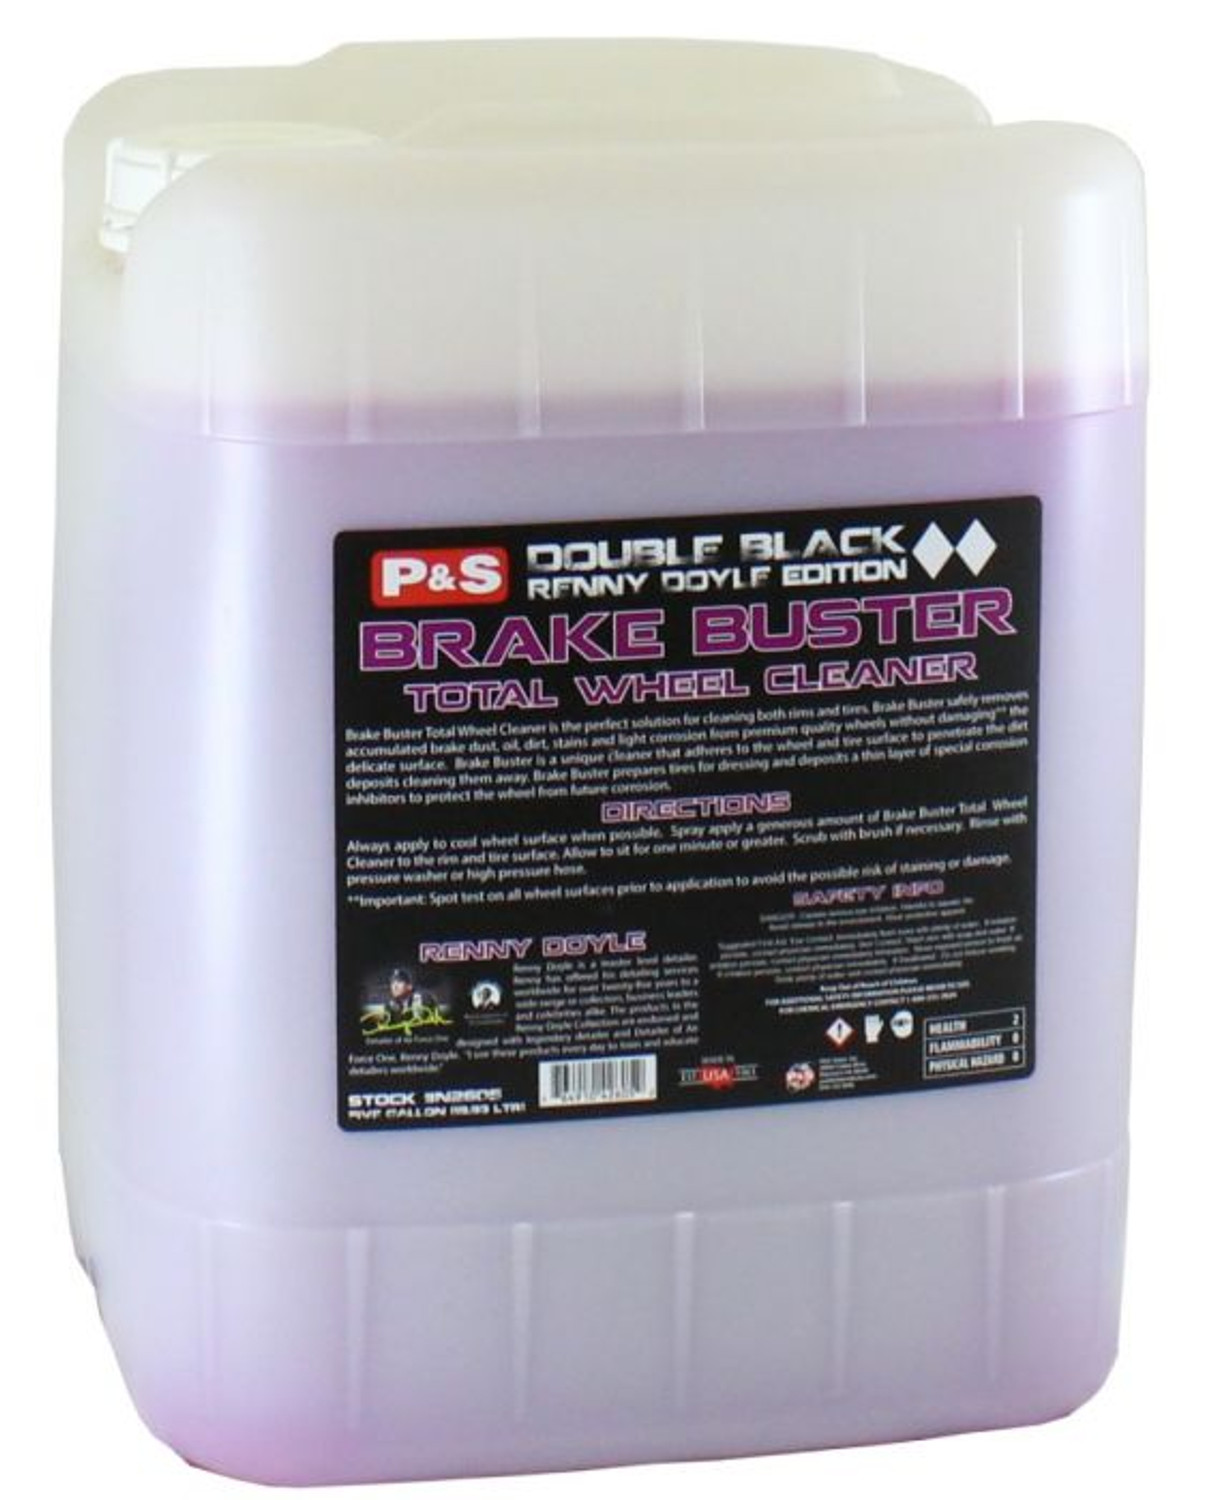 P&S Brake Buster Wheel Cleaner Review - Is This Product Worth The Money? 